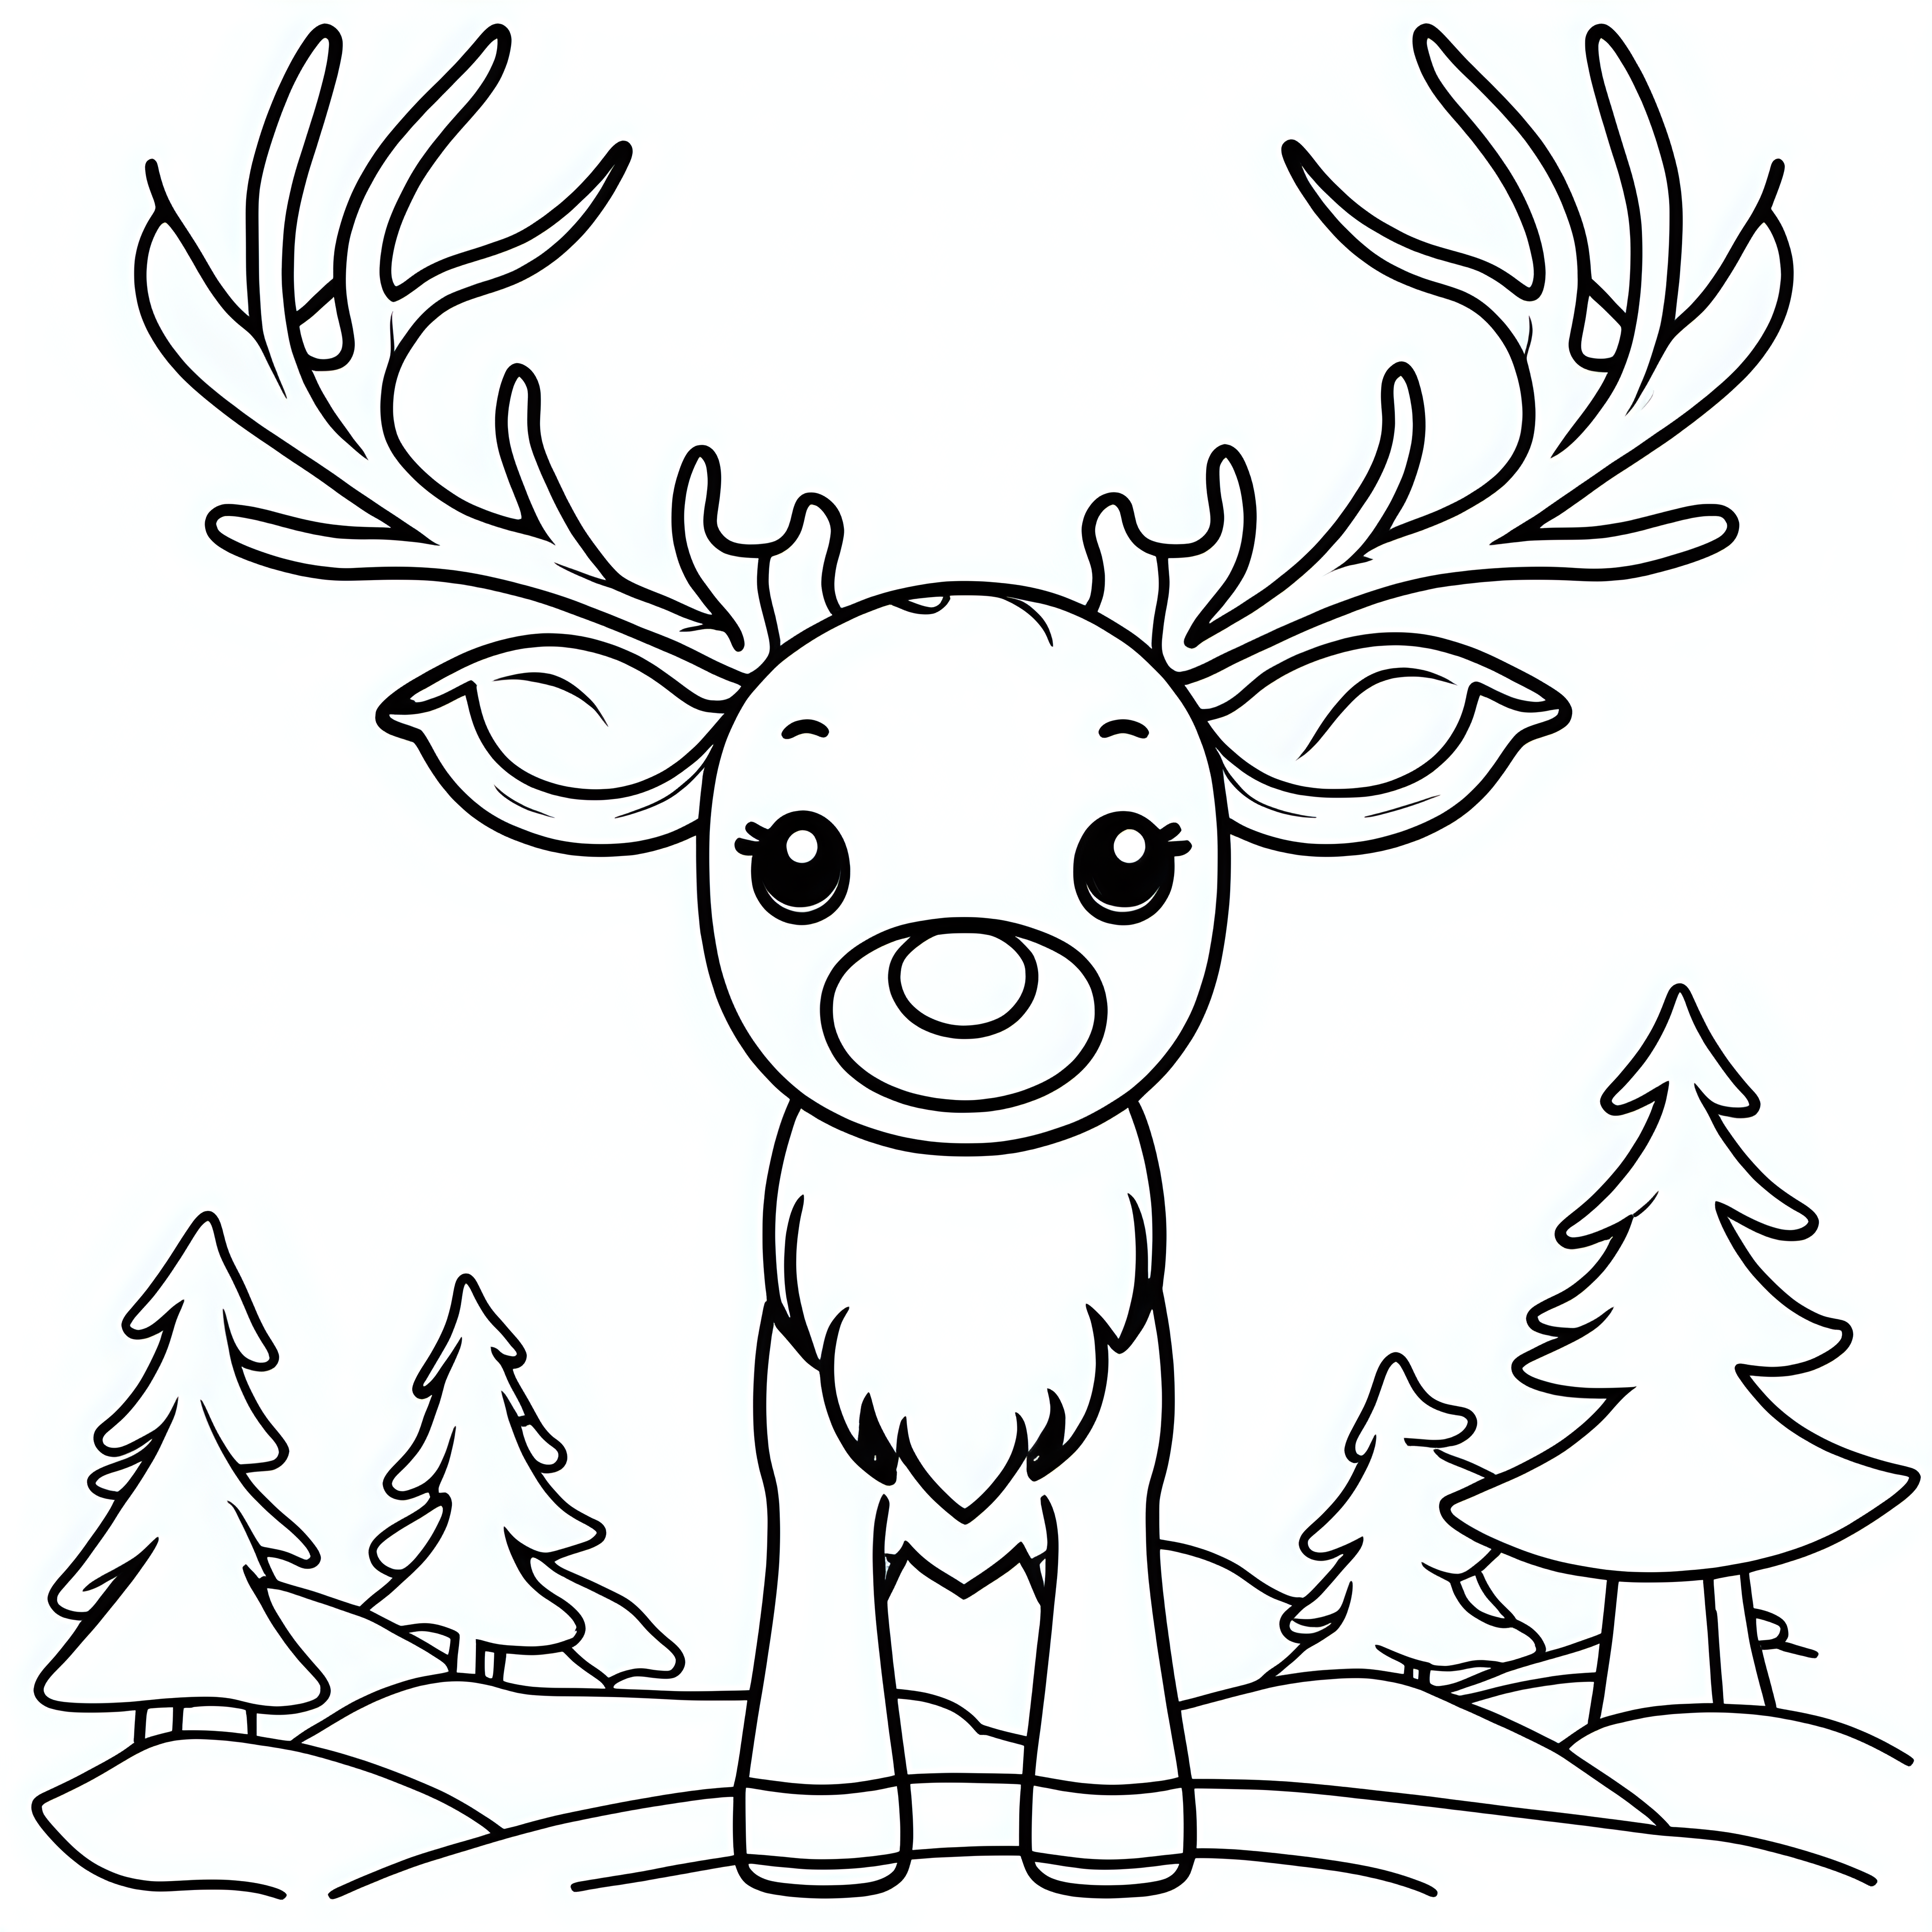 draw a cute Elk, only the outline in black,  coloring book for kids